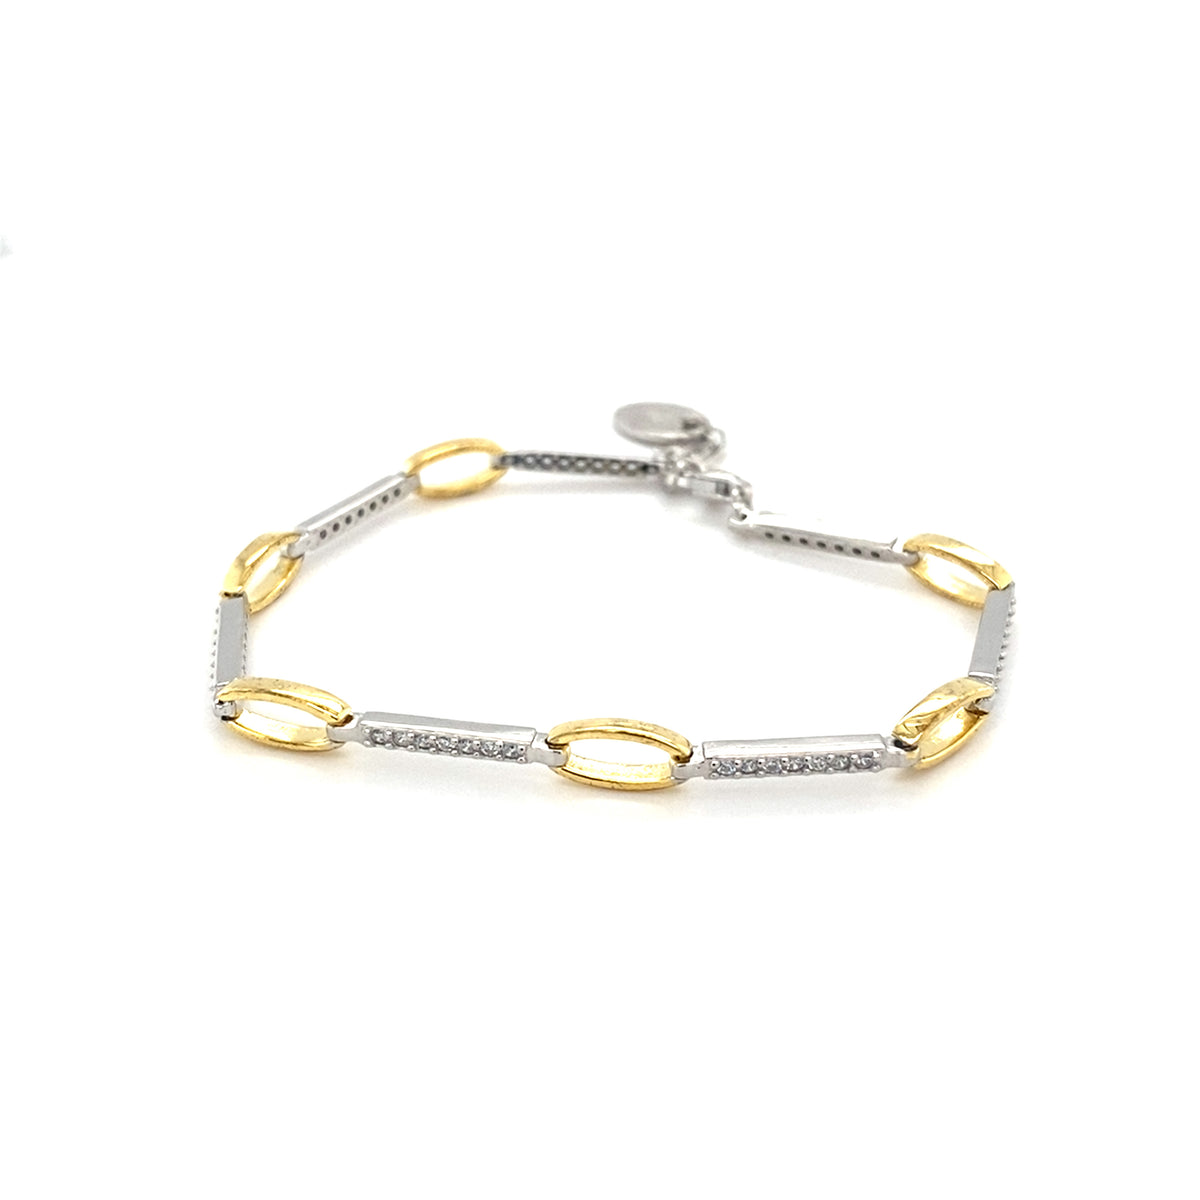 Sterling Silver Bracelet with Clear Stones and Gold Plated Links